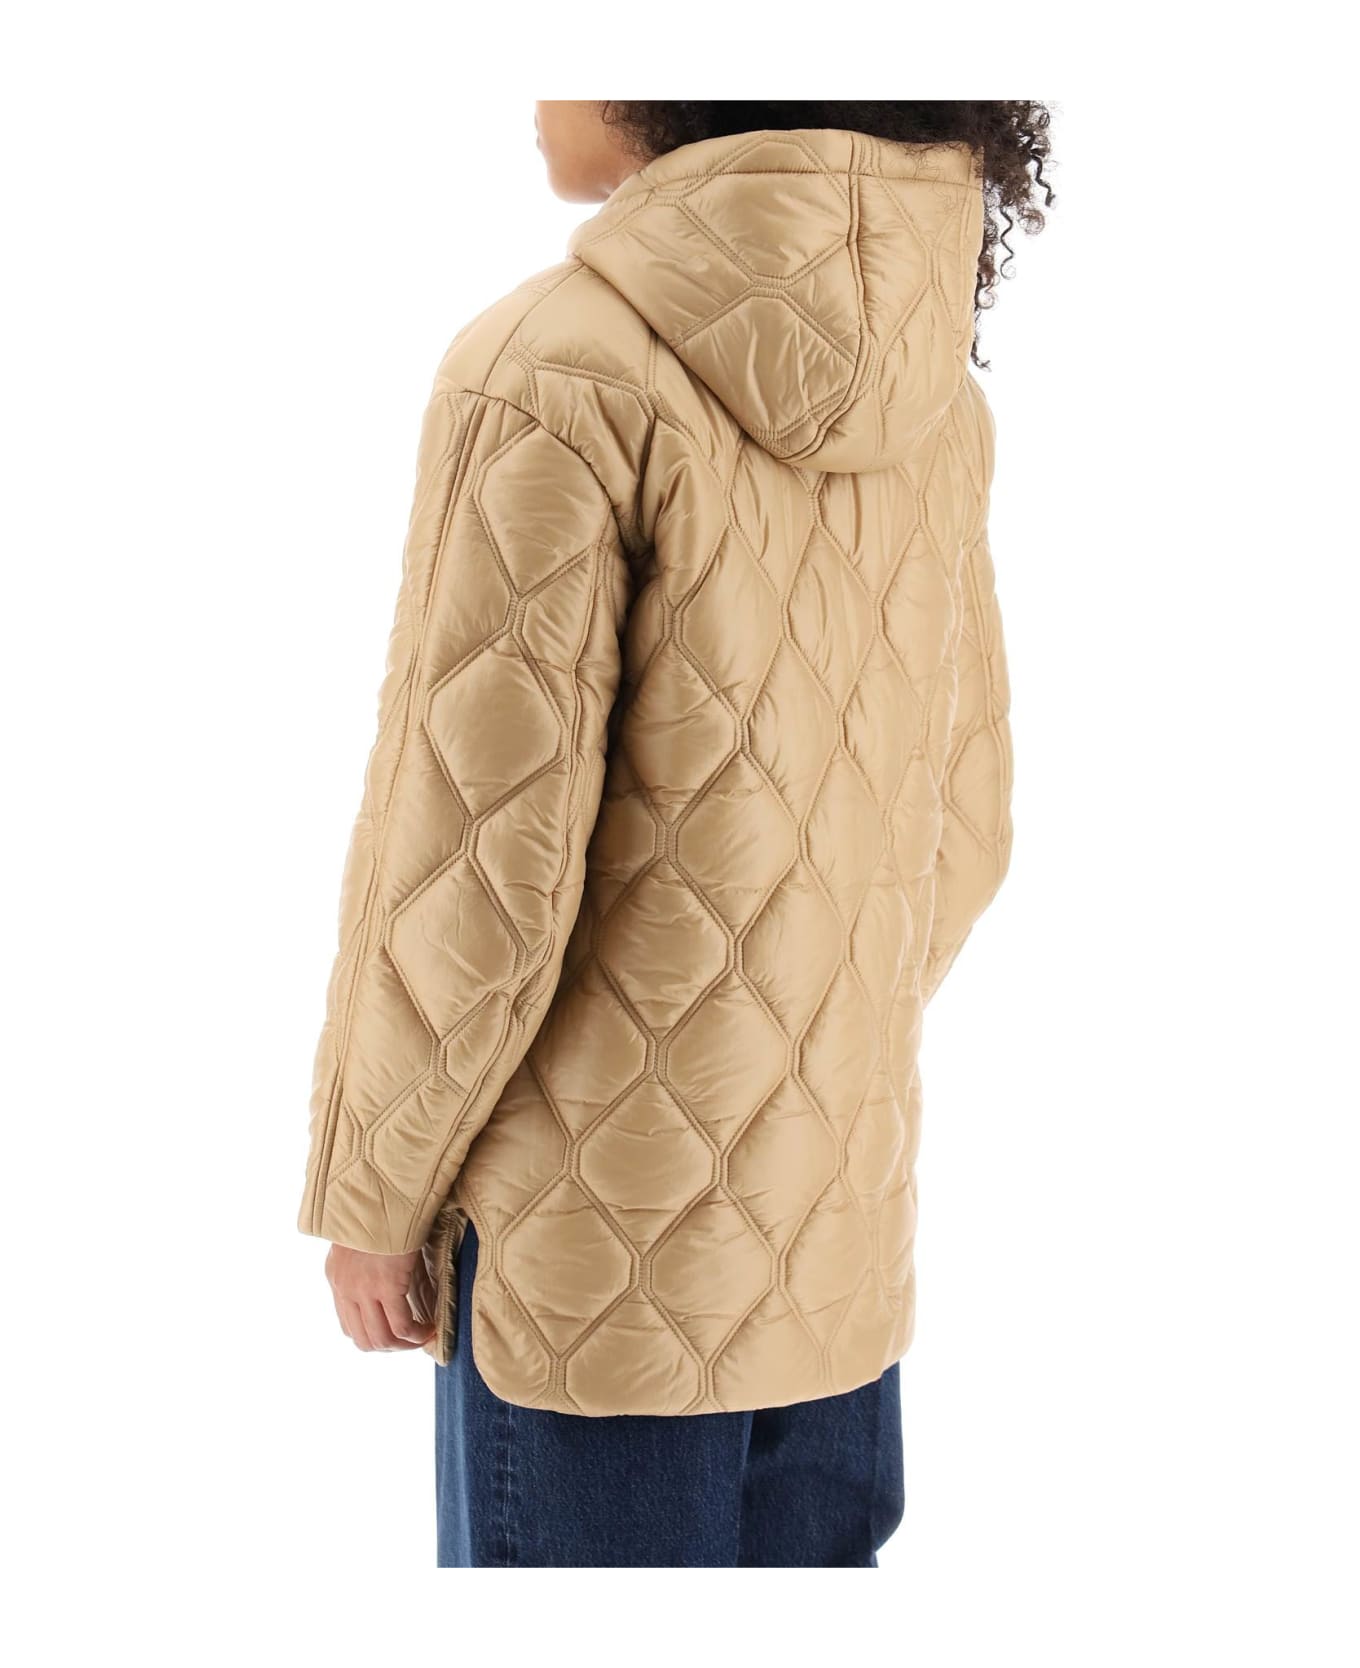 Ganni Hooded Quilted Jacket - TANIN (Beige)